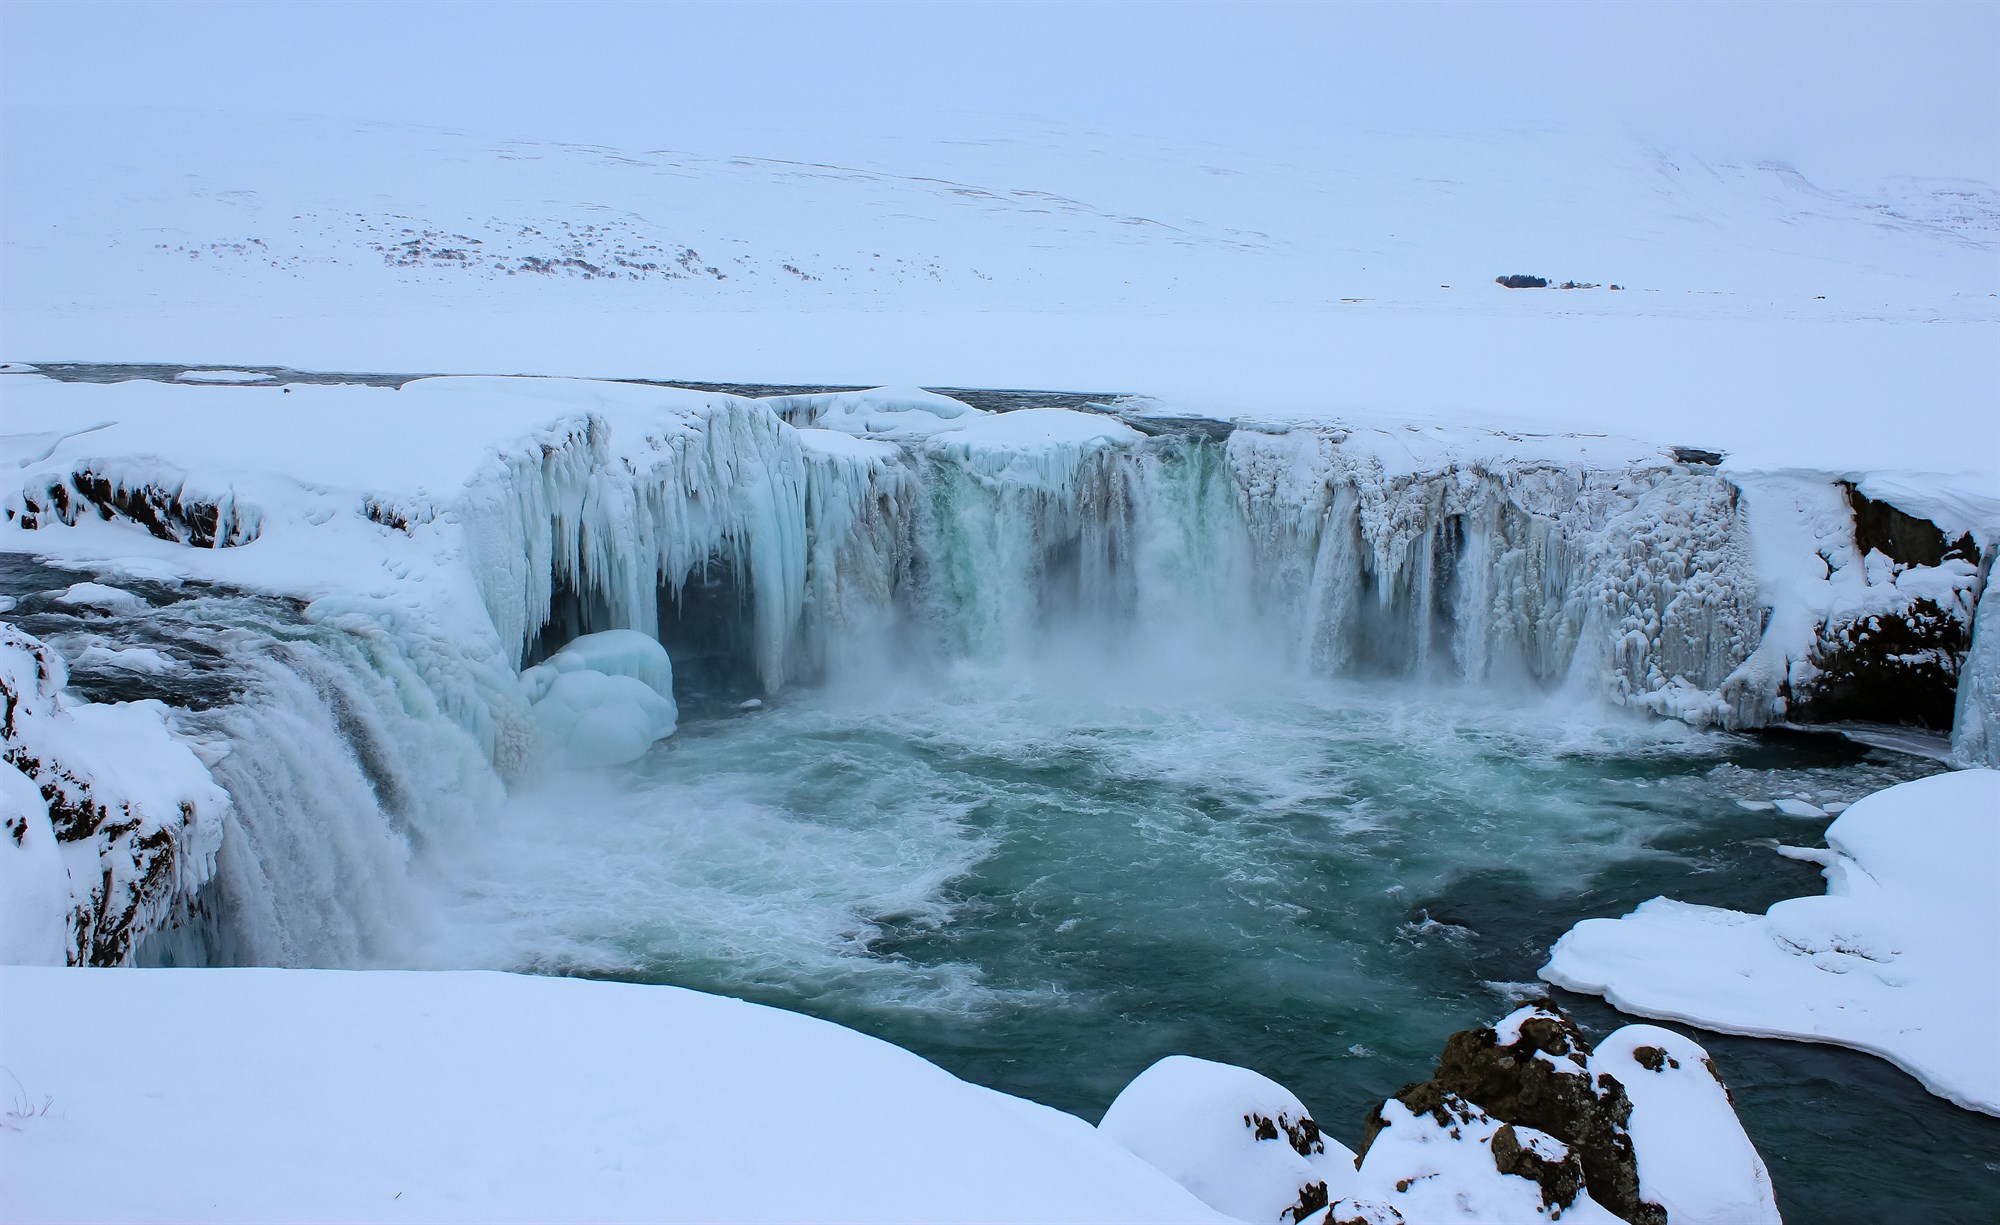 Gulfoss waterfall in Iceland covered in snow